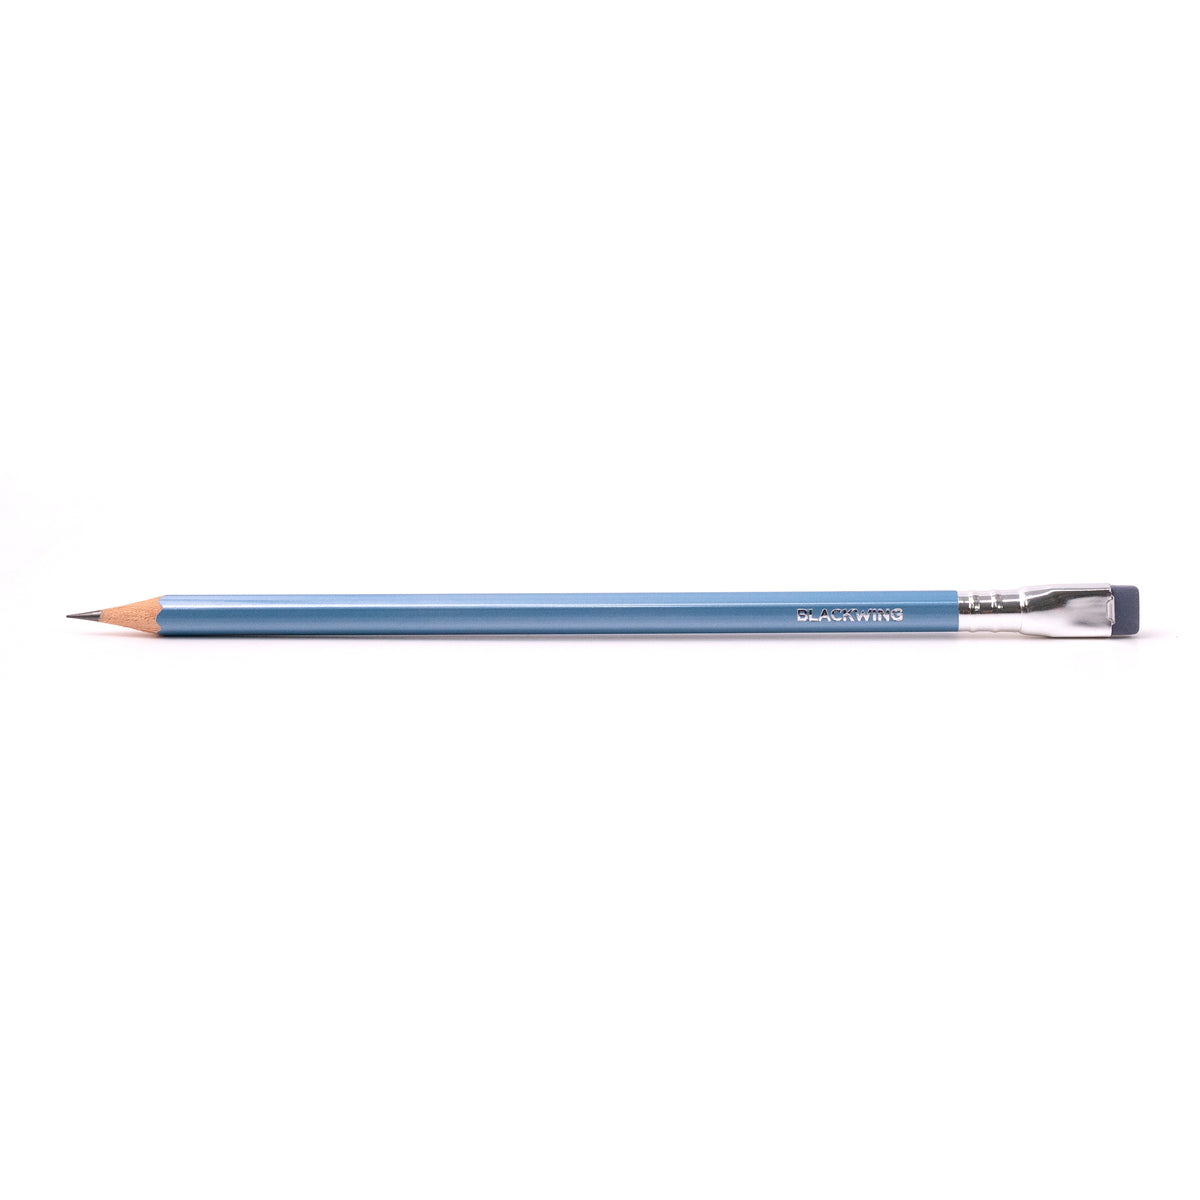 A Blackwing Pearl - Blue pencil with a graphite core on a white background.